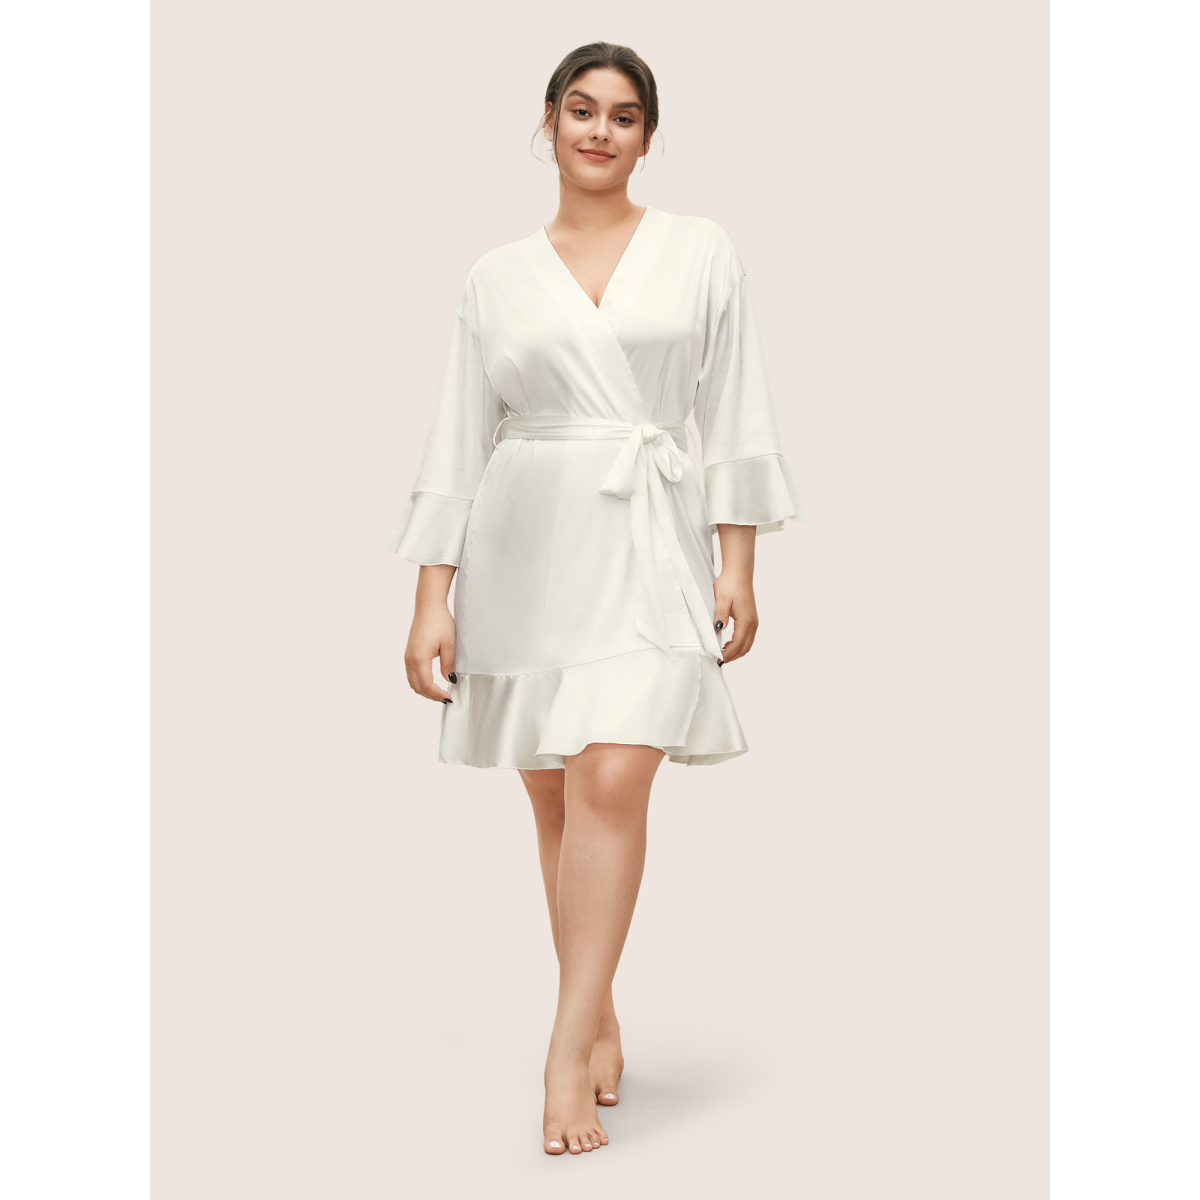 

Plus Size Solid Rhinestone Flutter Sleeve Belted Robe White Plain Non Everyday Lounge Robes/Robes Sets  Bloomchic